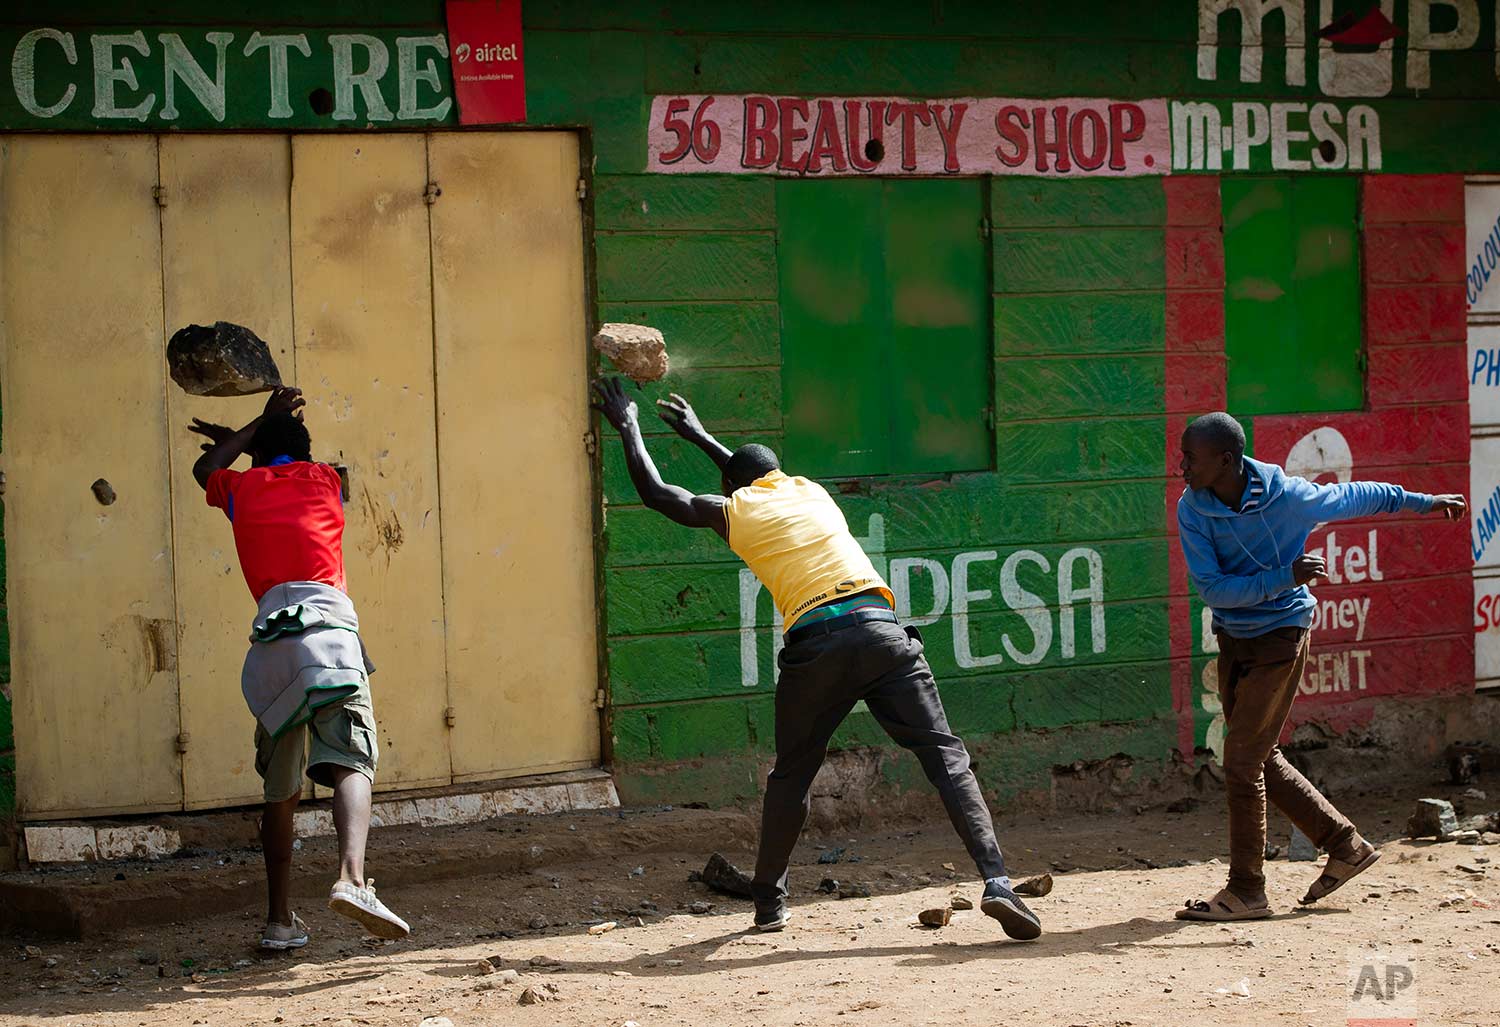  In this Saturday, Oct. 28, 2017 photo, opposition supporters attempt to break the door of a shop in order to loot it, in the slum of Kawangware in Nairobi, Kenya. Kenyan opposition areas were calmer Saturday, a day after the country's election commi